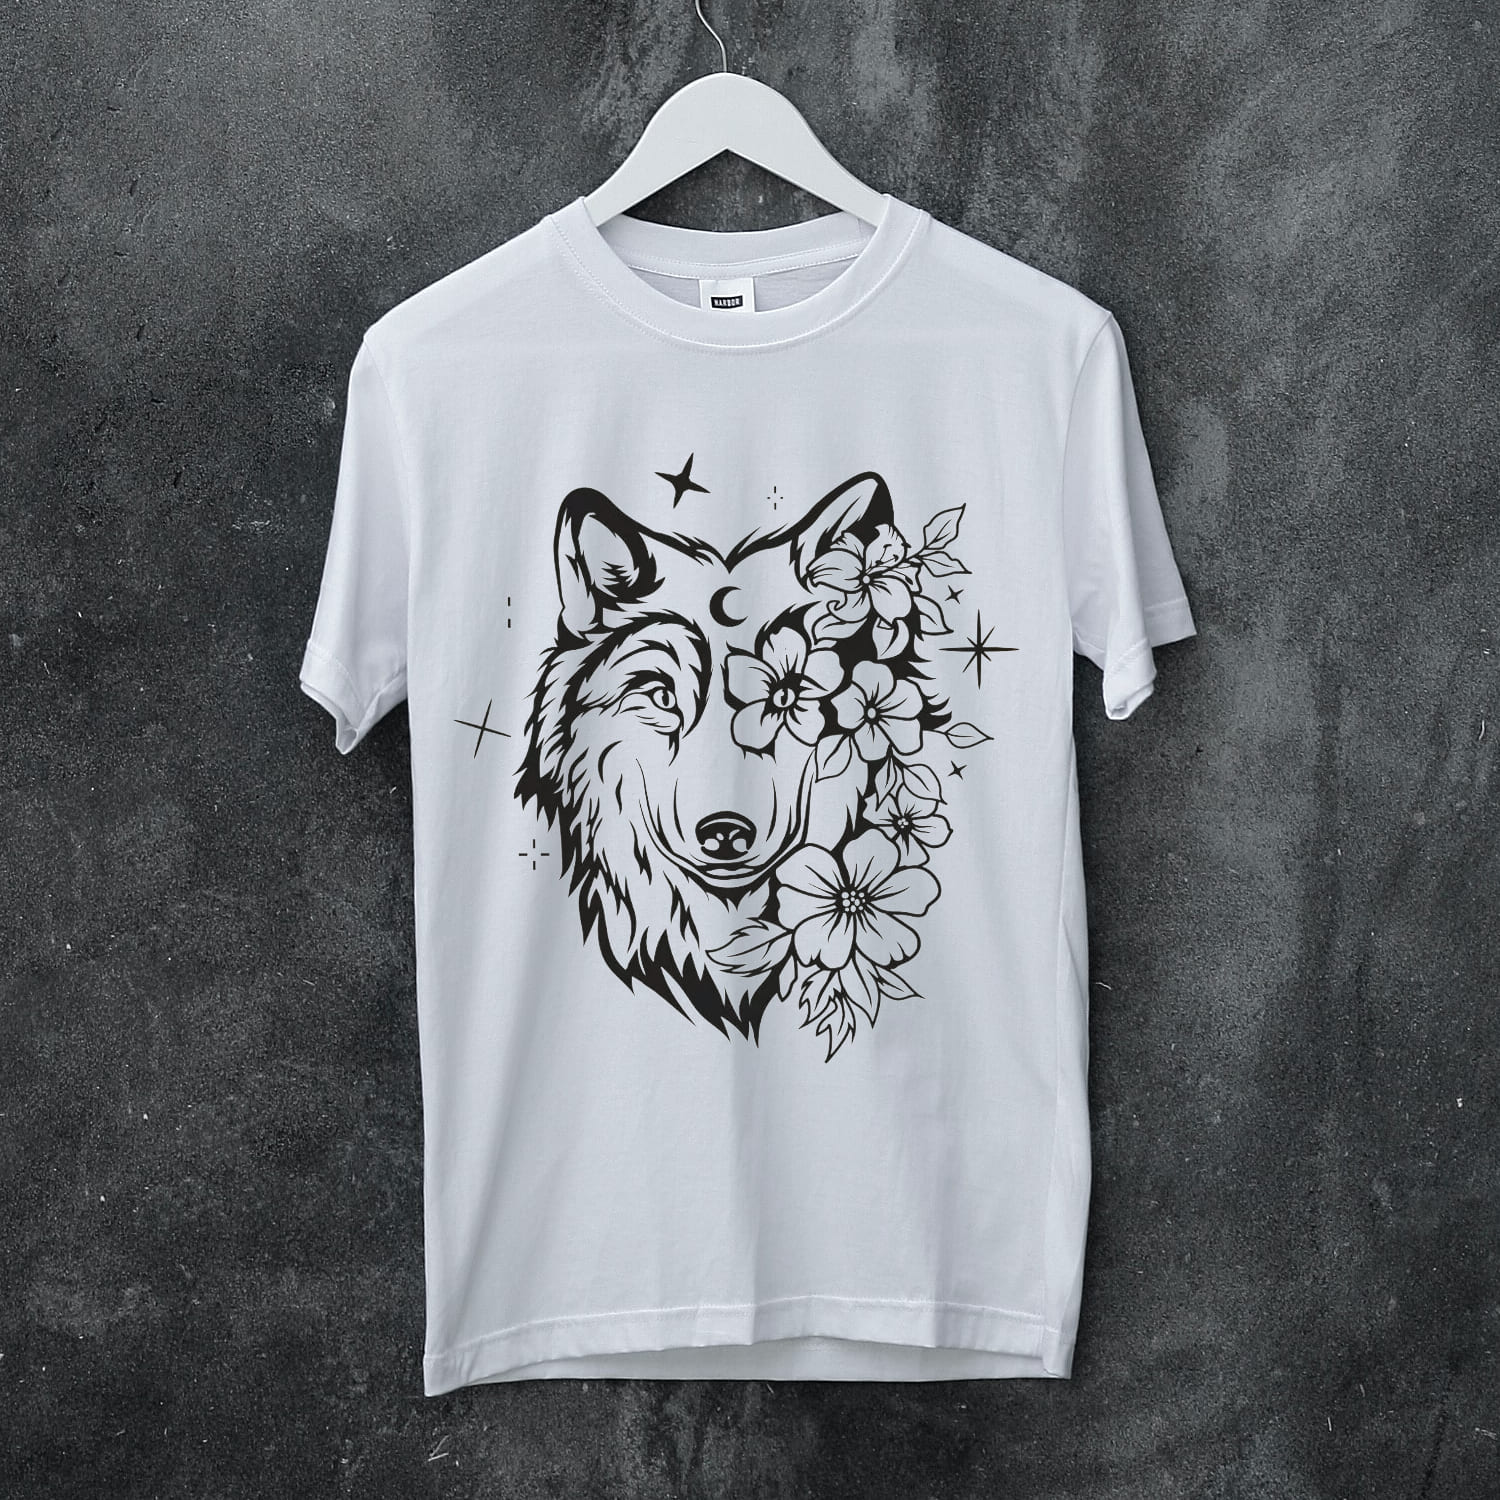 White t - shirt with a wolf and flowers on it.